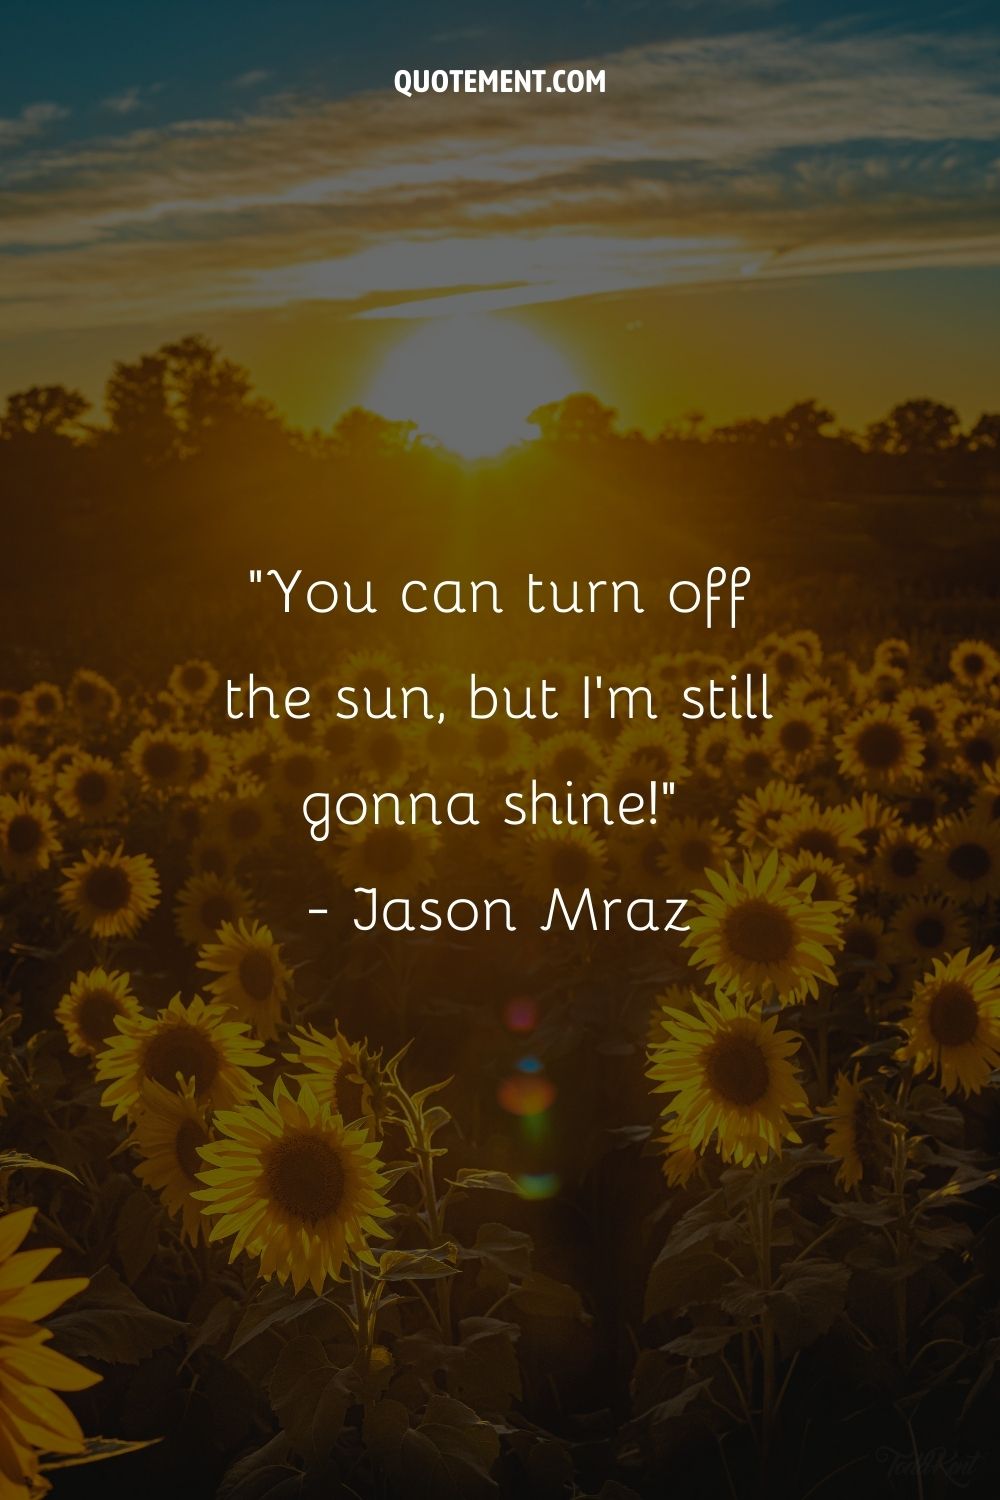 You can turn off the sun, but I'm still gonna shine!